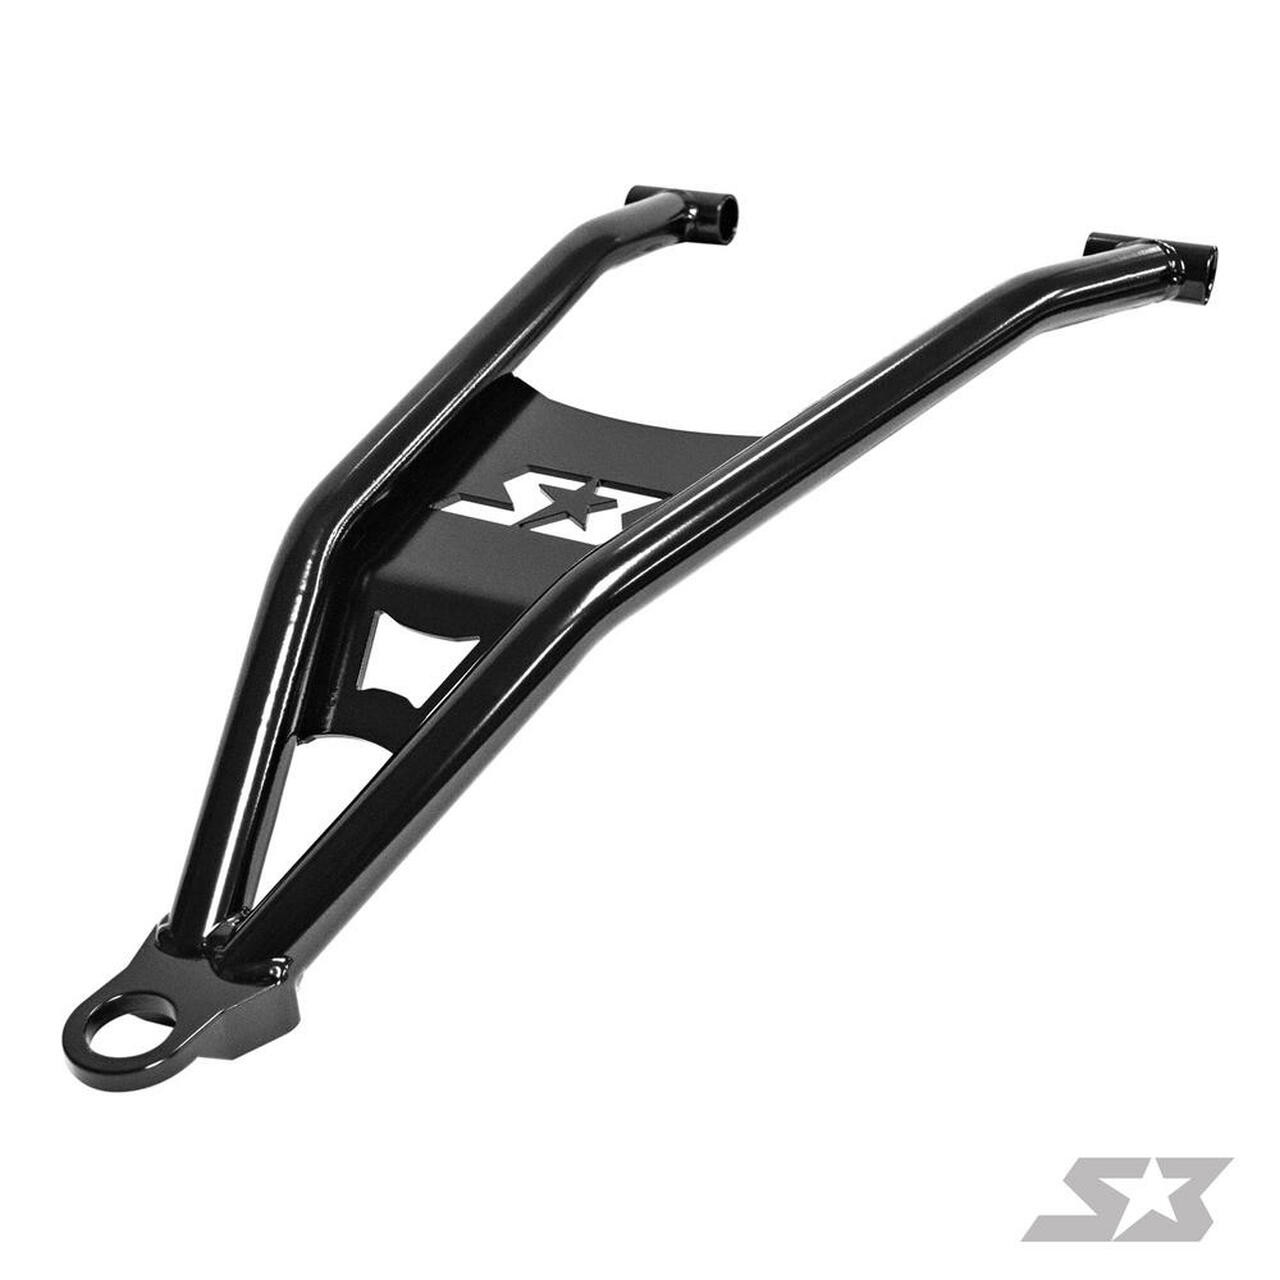 POLARIS RZR XP TURBO HIGH CLEARANCE LOWER A-ARMS BY S3